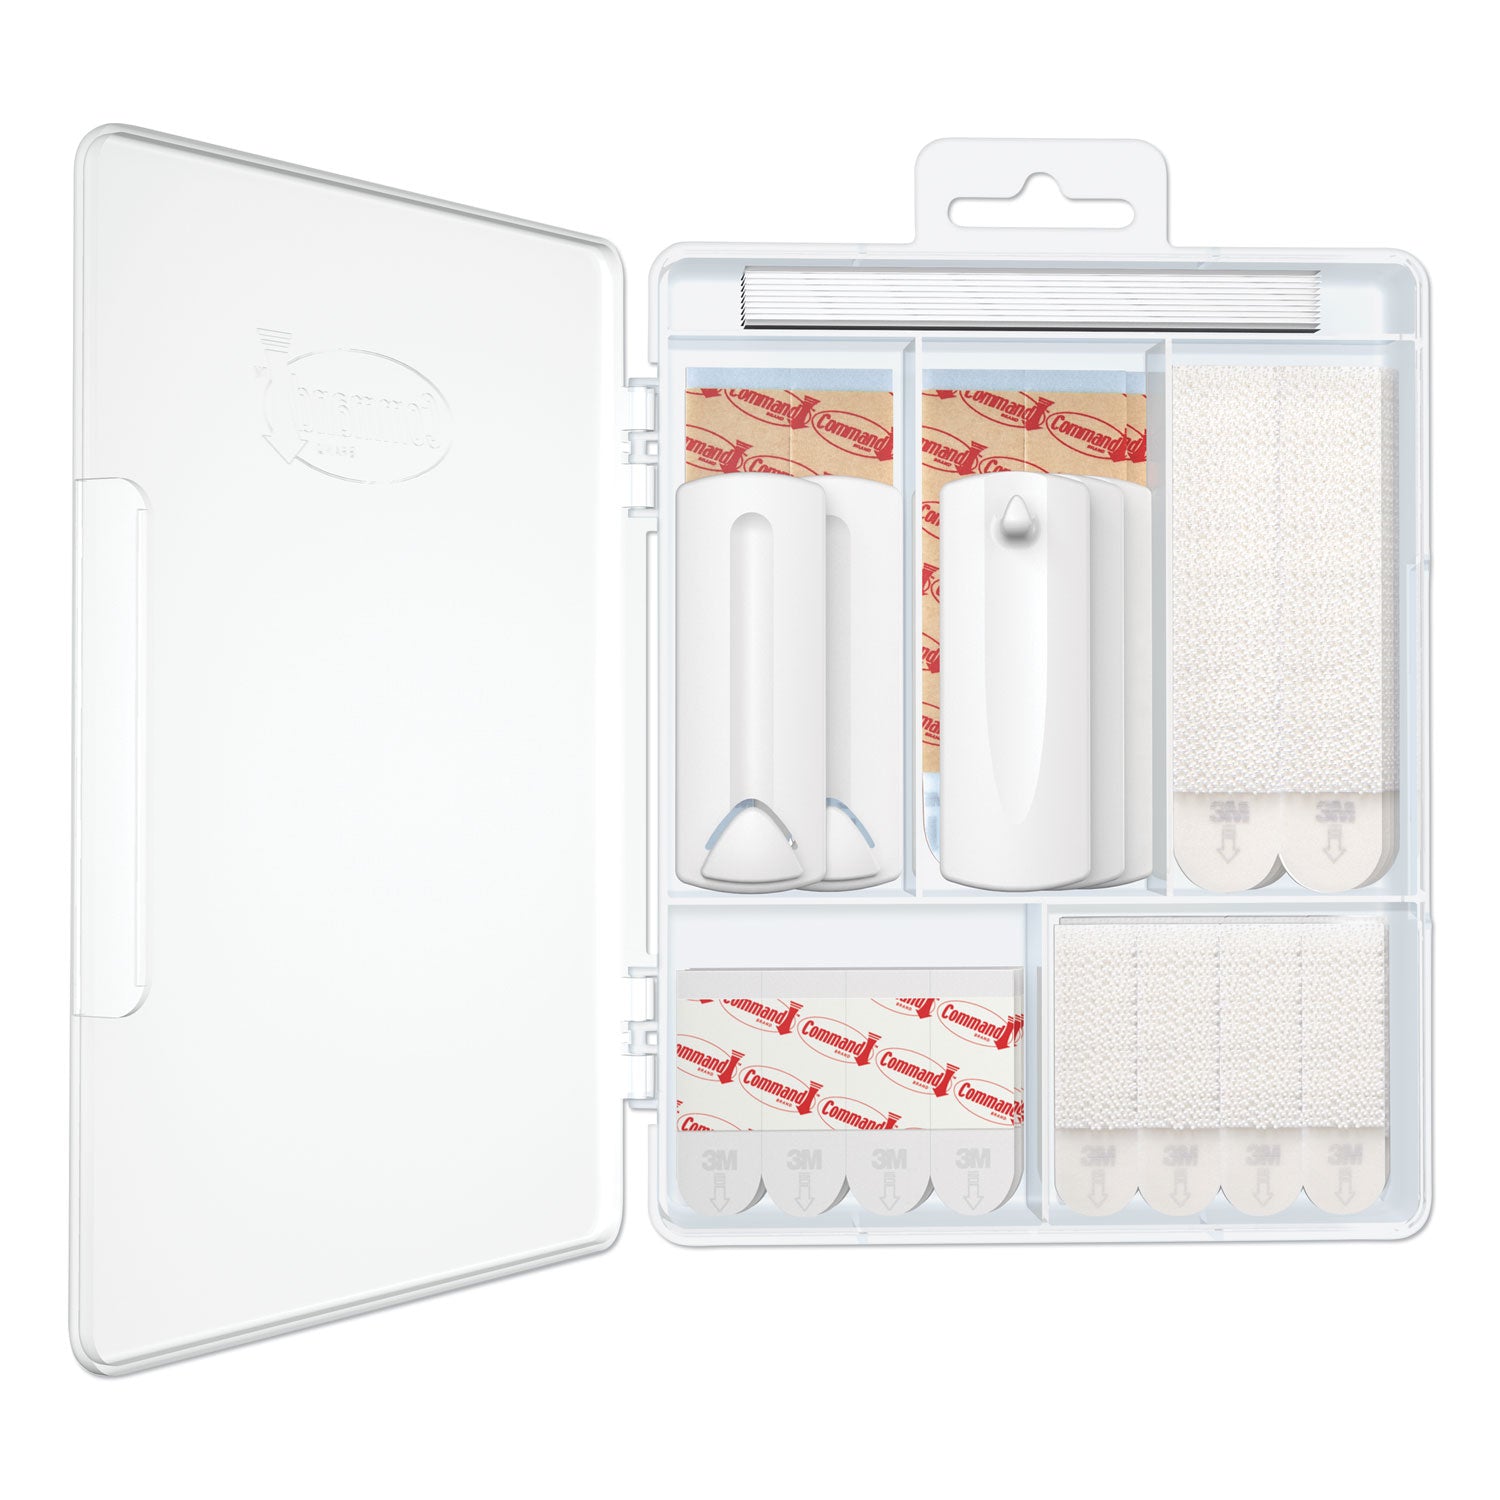 picture-hanging-kit-assorted-sizes-plastic-white-clear-1-lb;-4-lb;-5-lb-capacities-38-pieces-pack_mmm17213es - 2